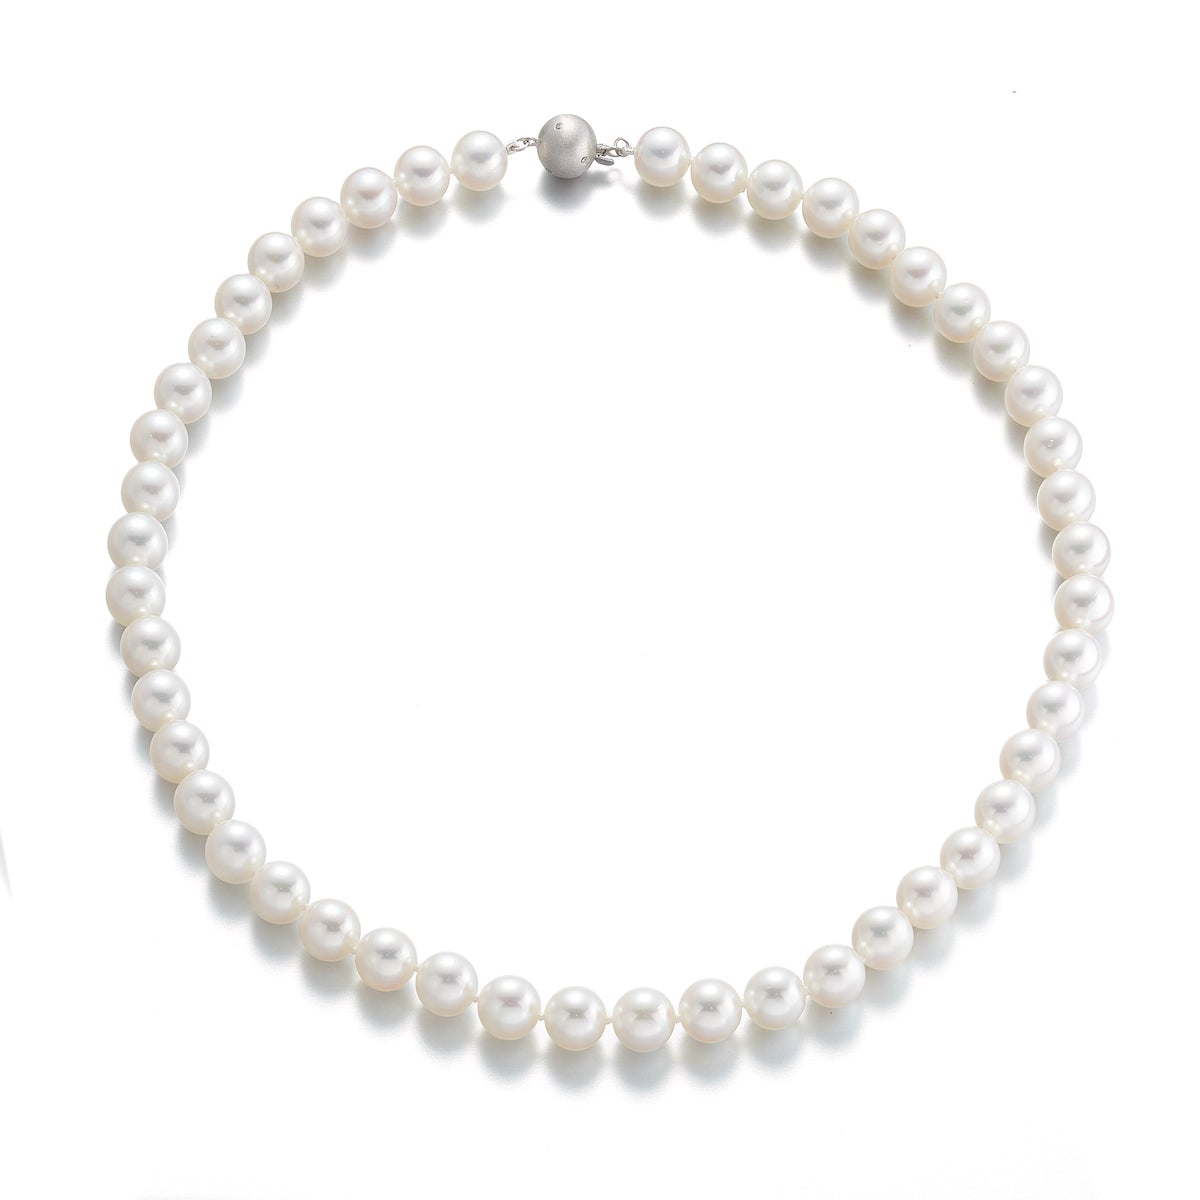 8.5mm White Akoya Pearl Necklace